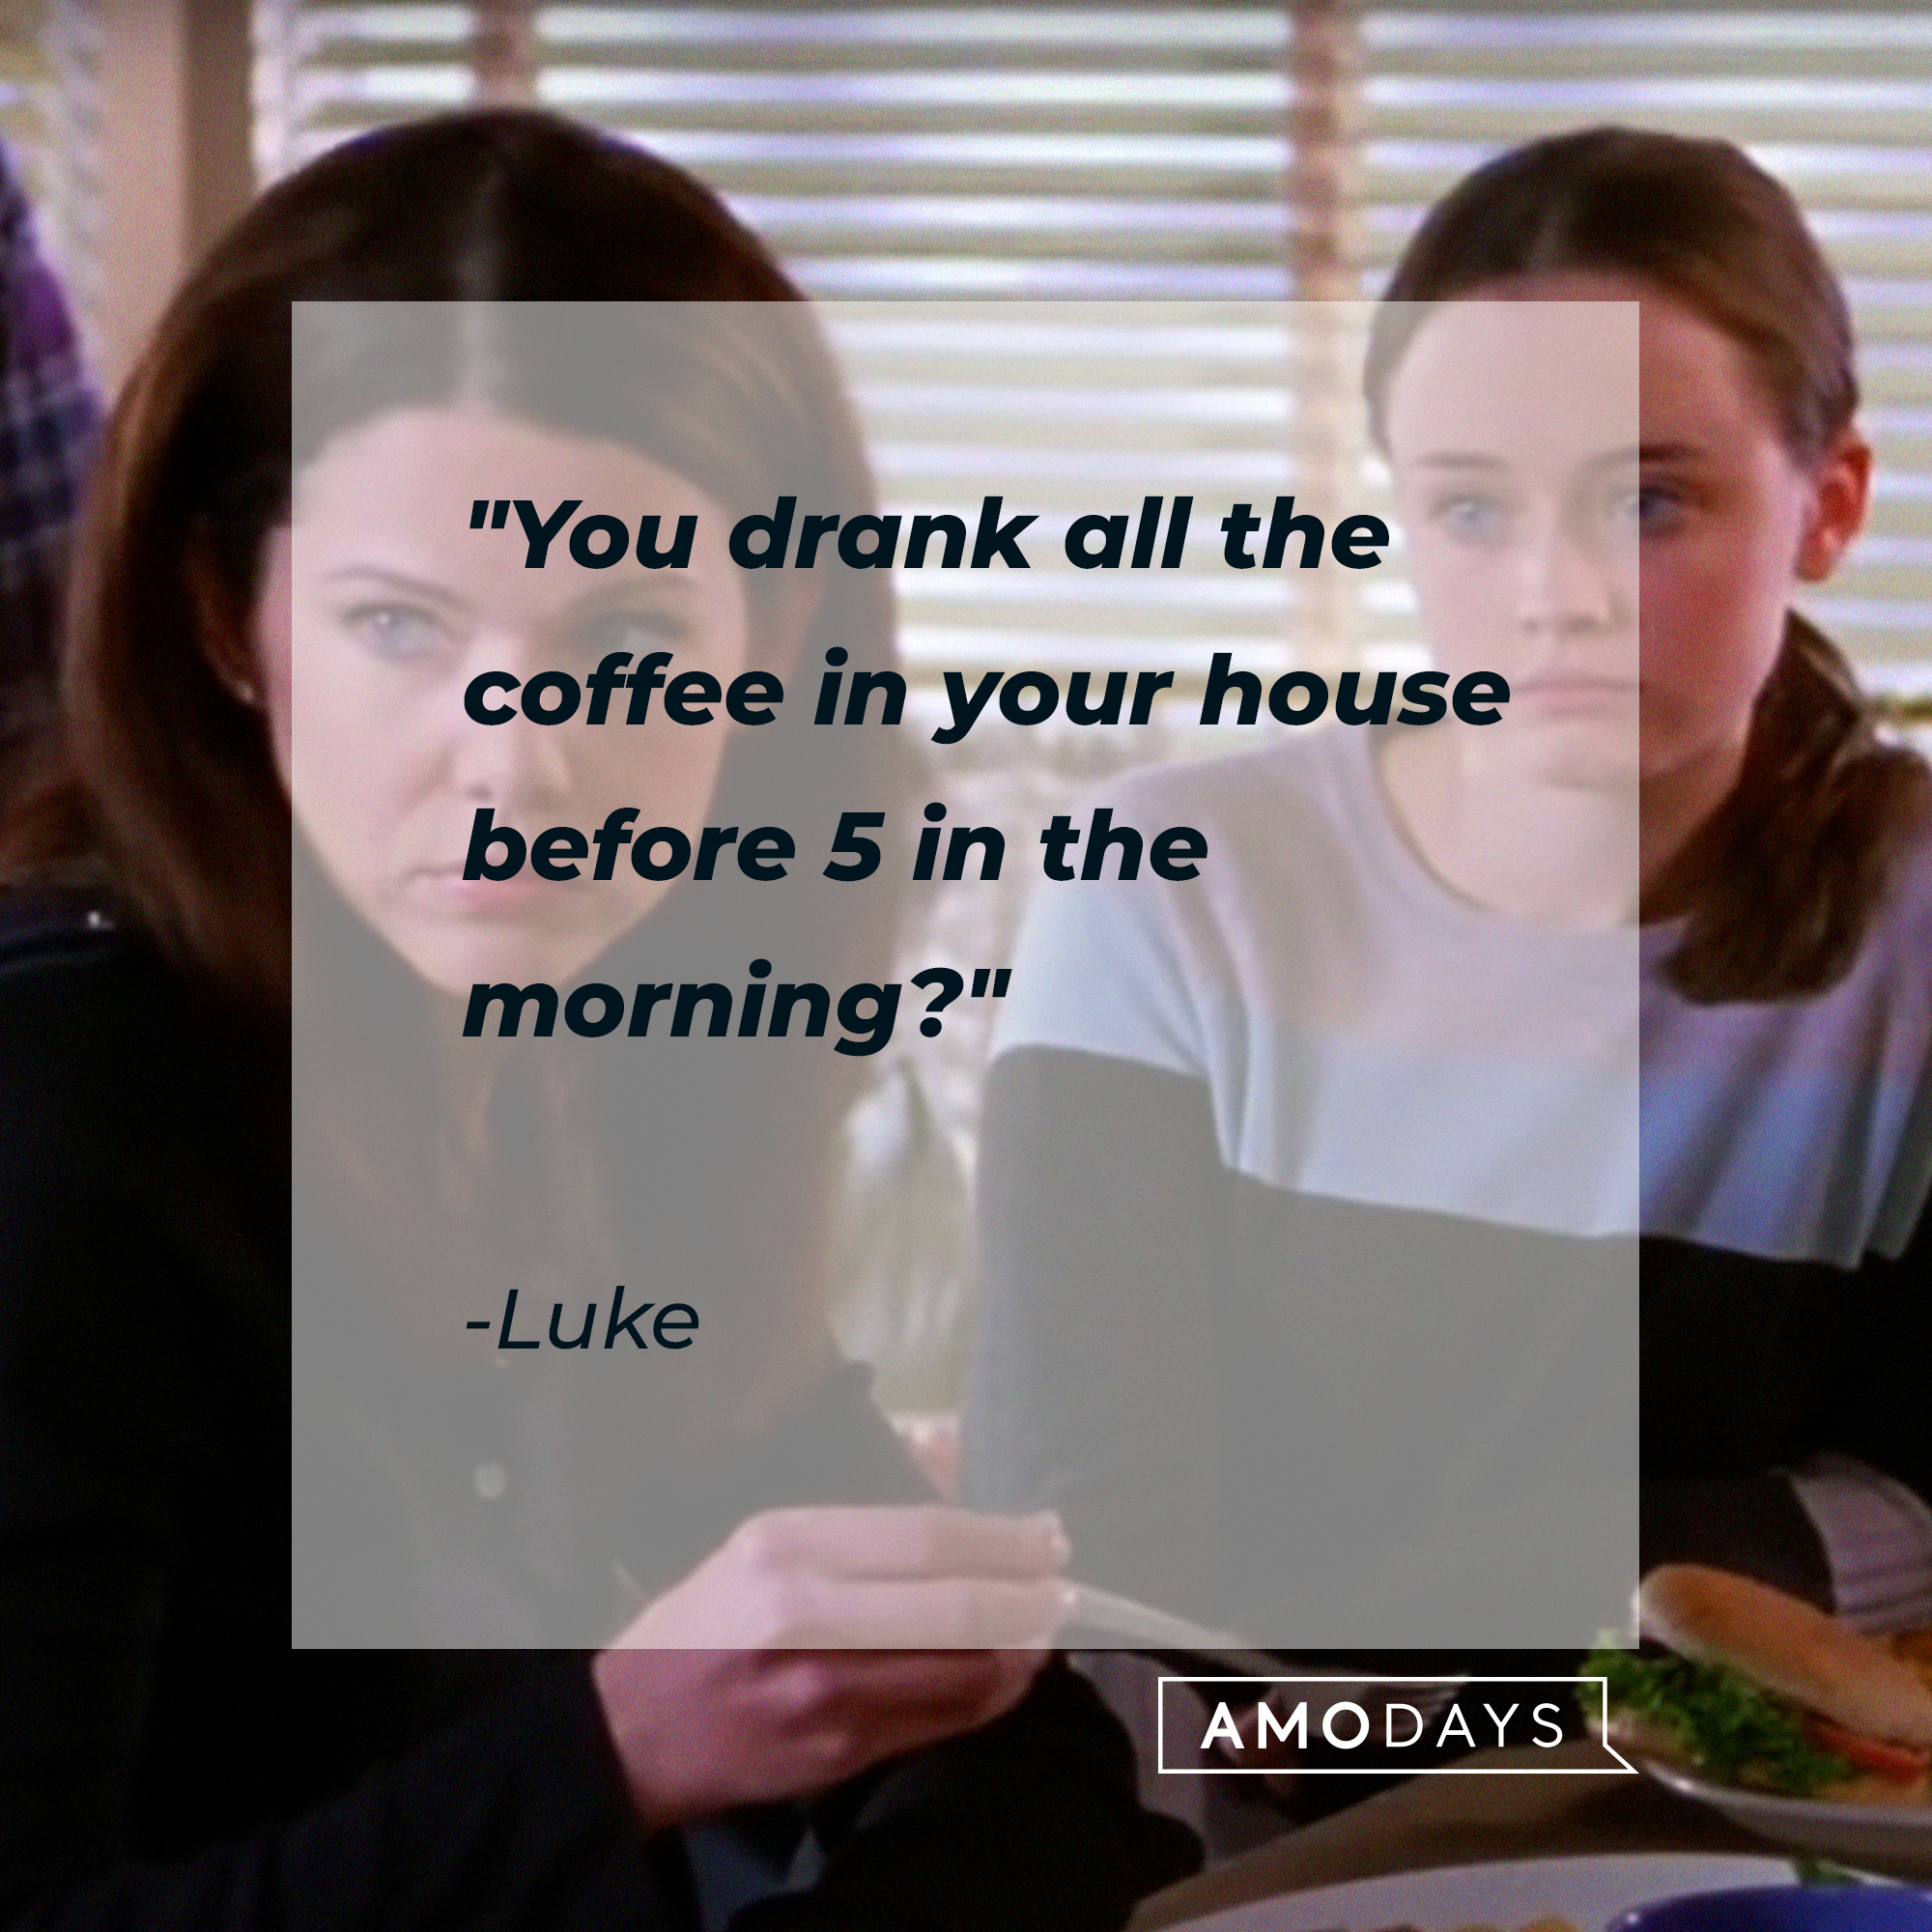 Luke's quote: "You drank all the coffee in your house before 5 in the morning?" | Source: facebook.com/GilmoreGirls